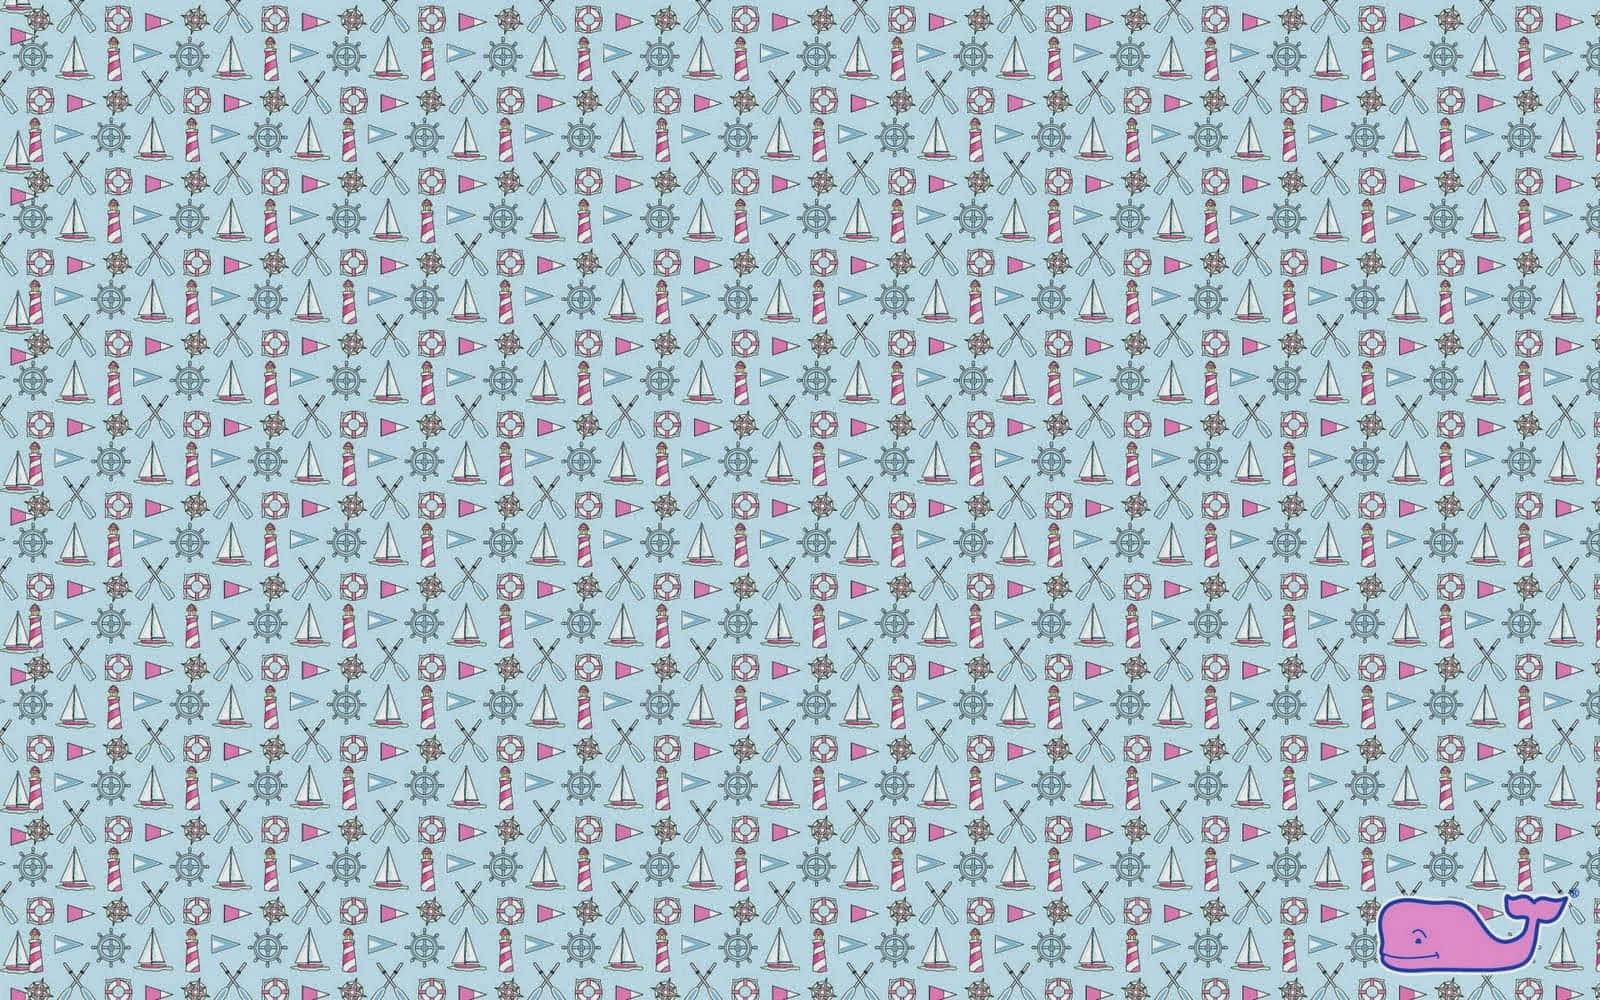 Take an adventure in style with Vineyard Vines Wallpaper